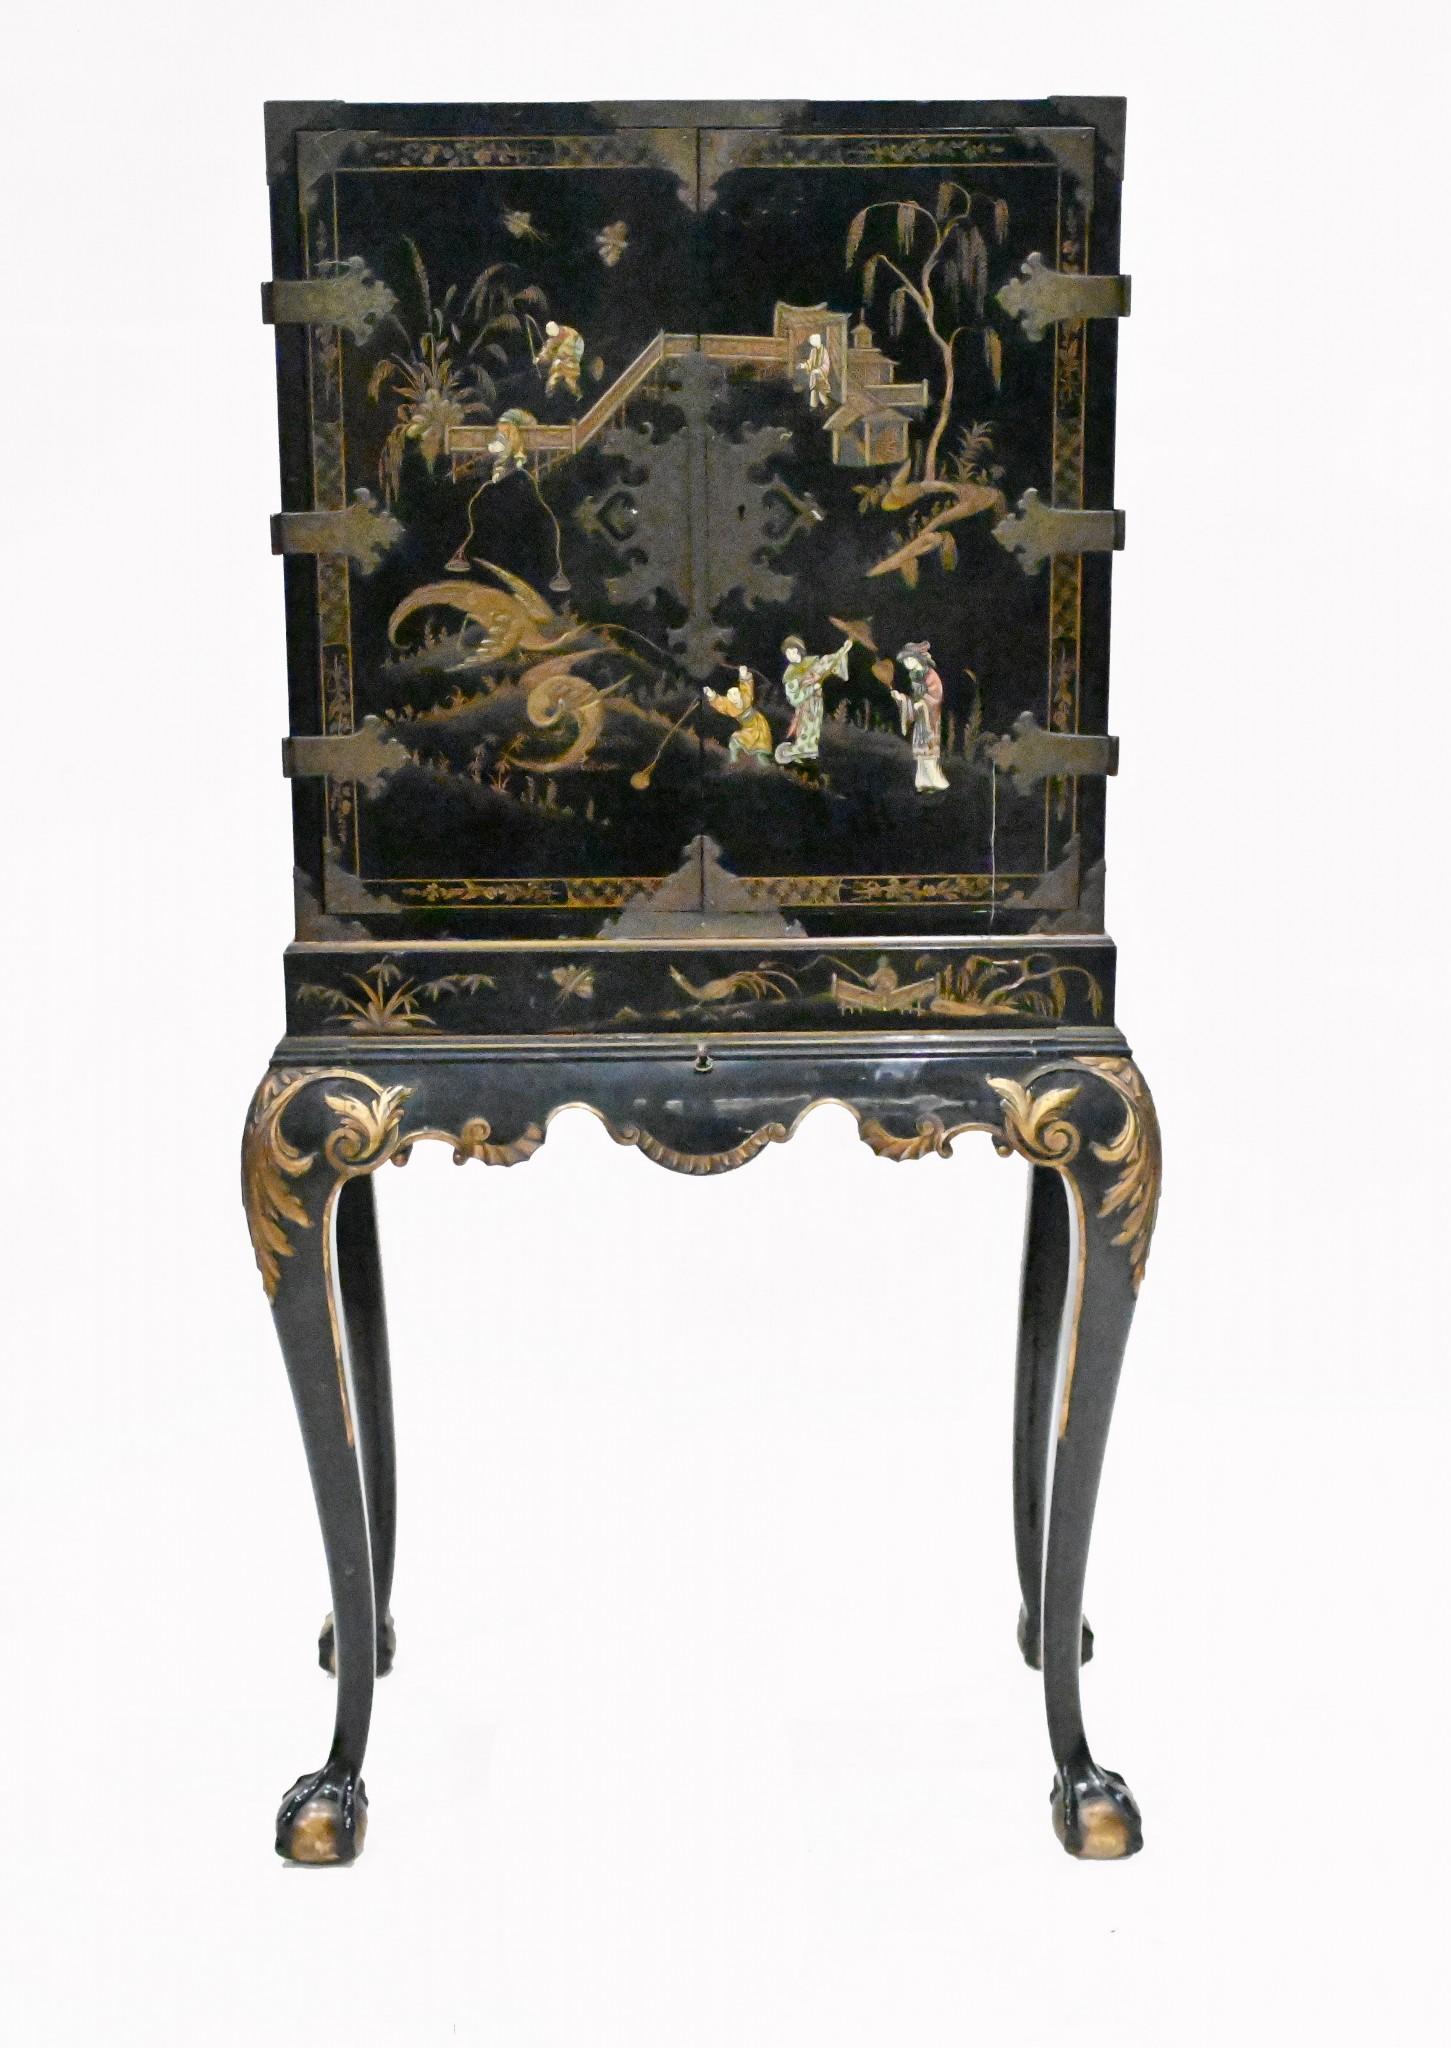 You are viewing a gorgeous antique speciman cabinet in the Chinese manner
We date the piece to circa 1900 and it features a plethora of intricate hand painted Chinoiserie
The two doors open out to reveal the numerous drawers inside
On every surface